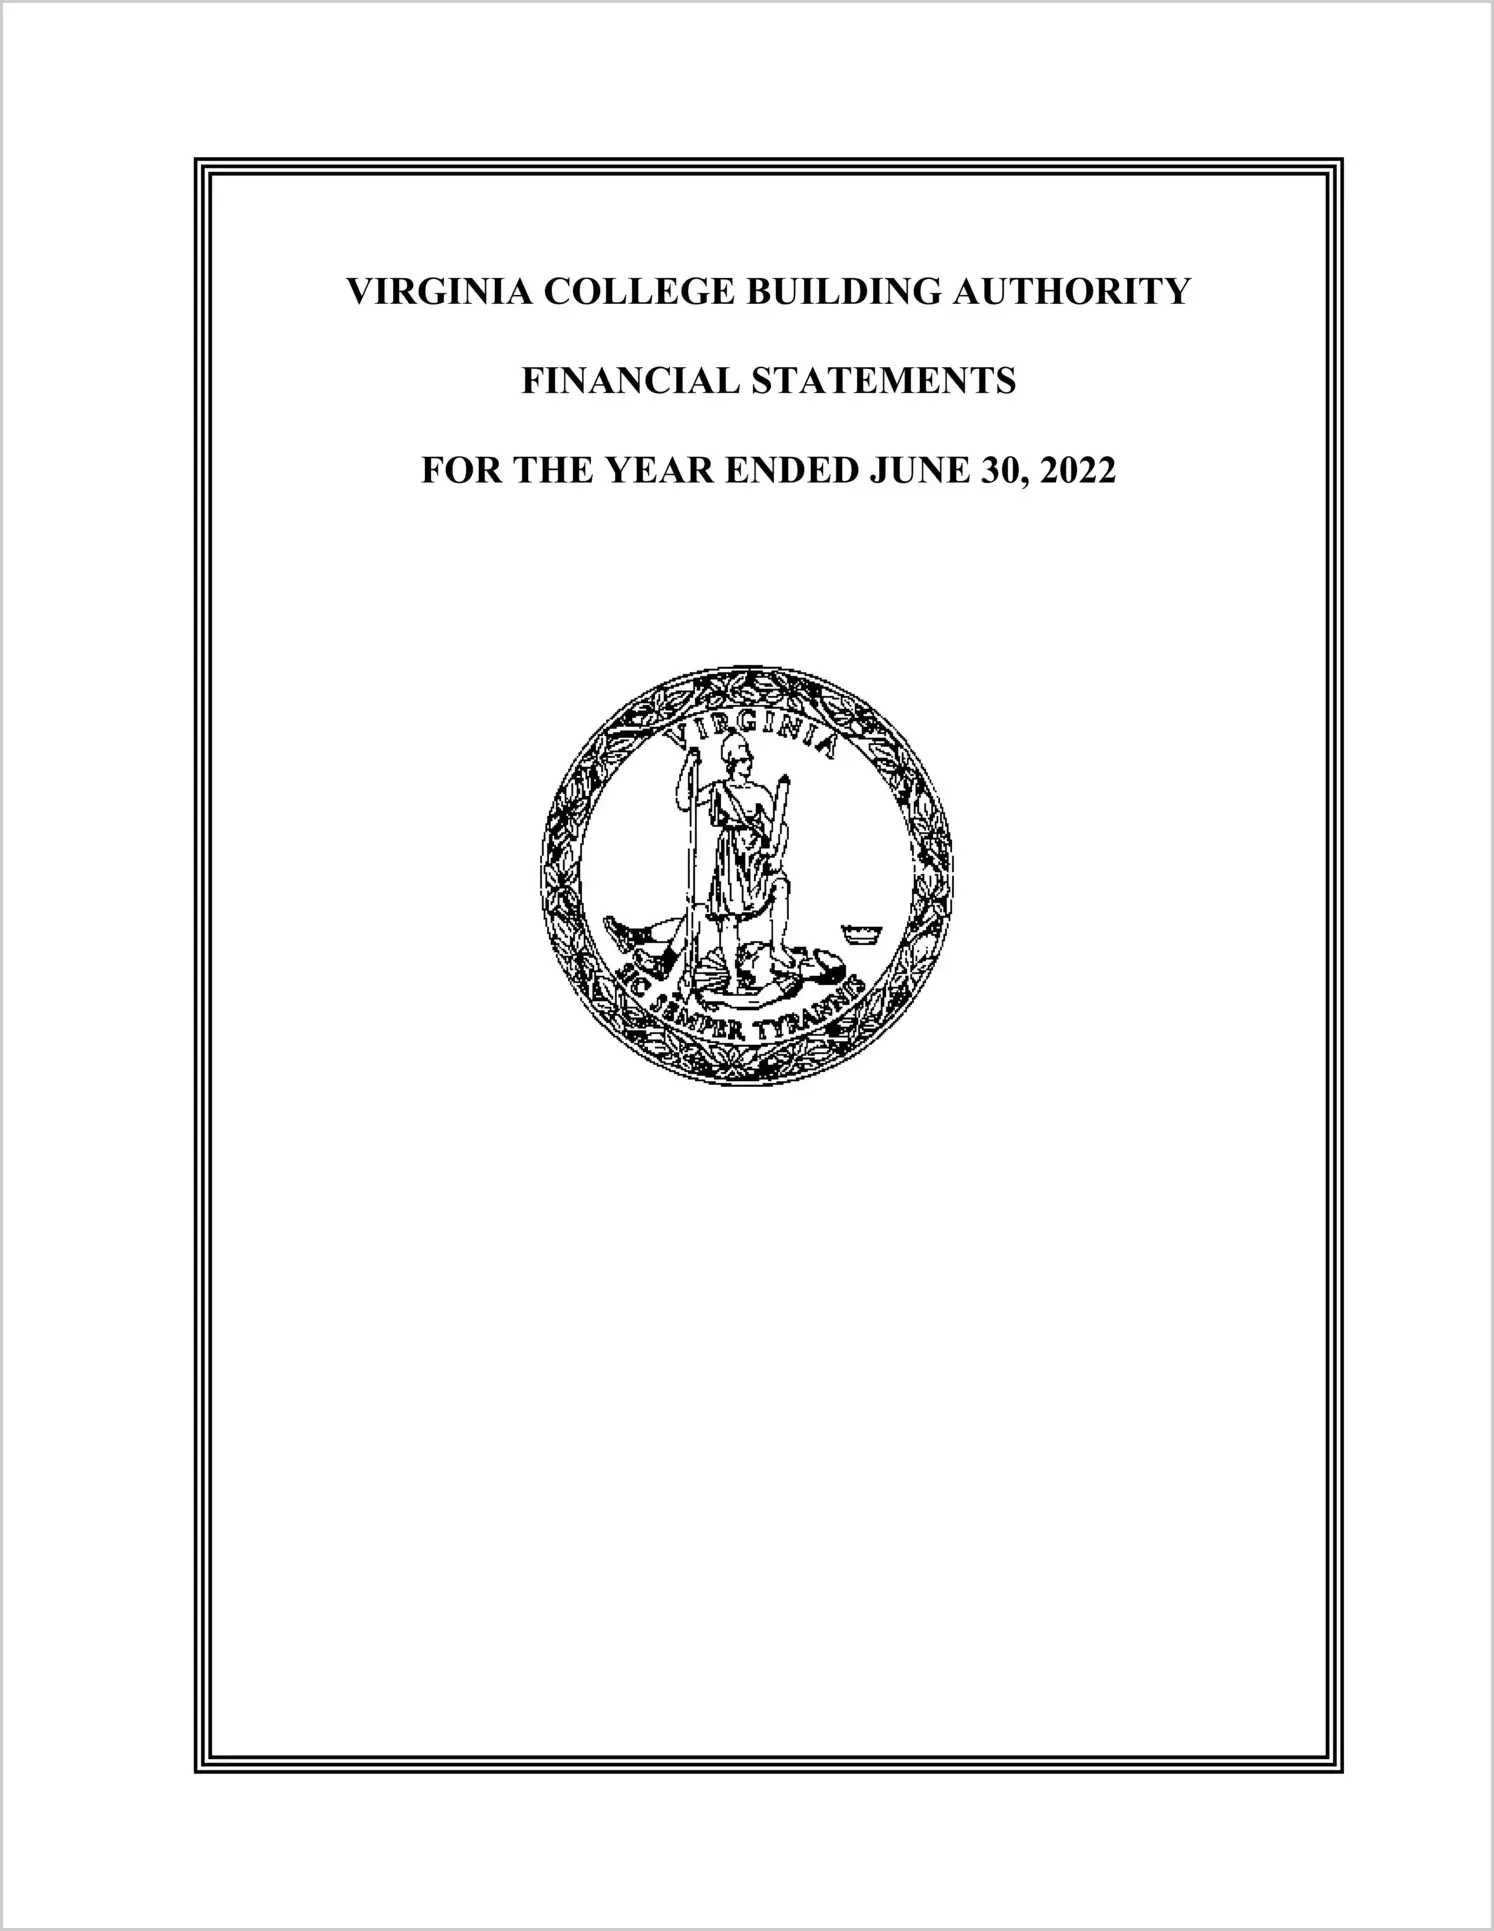 Virginia College Building Authority Financial Statements for the year ended June 30, 2022